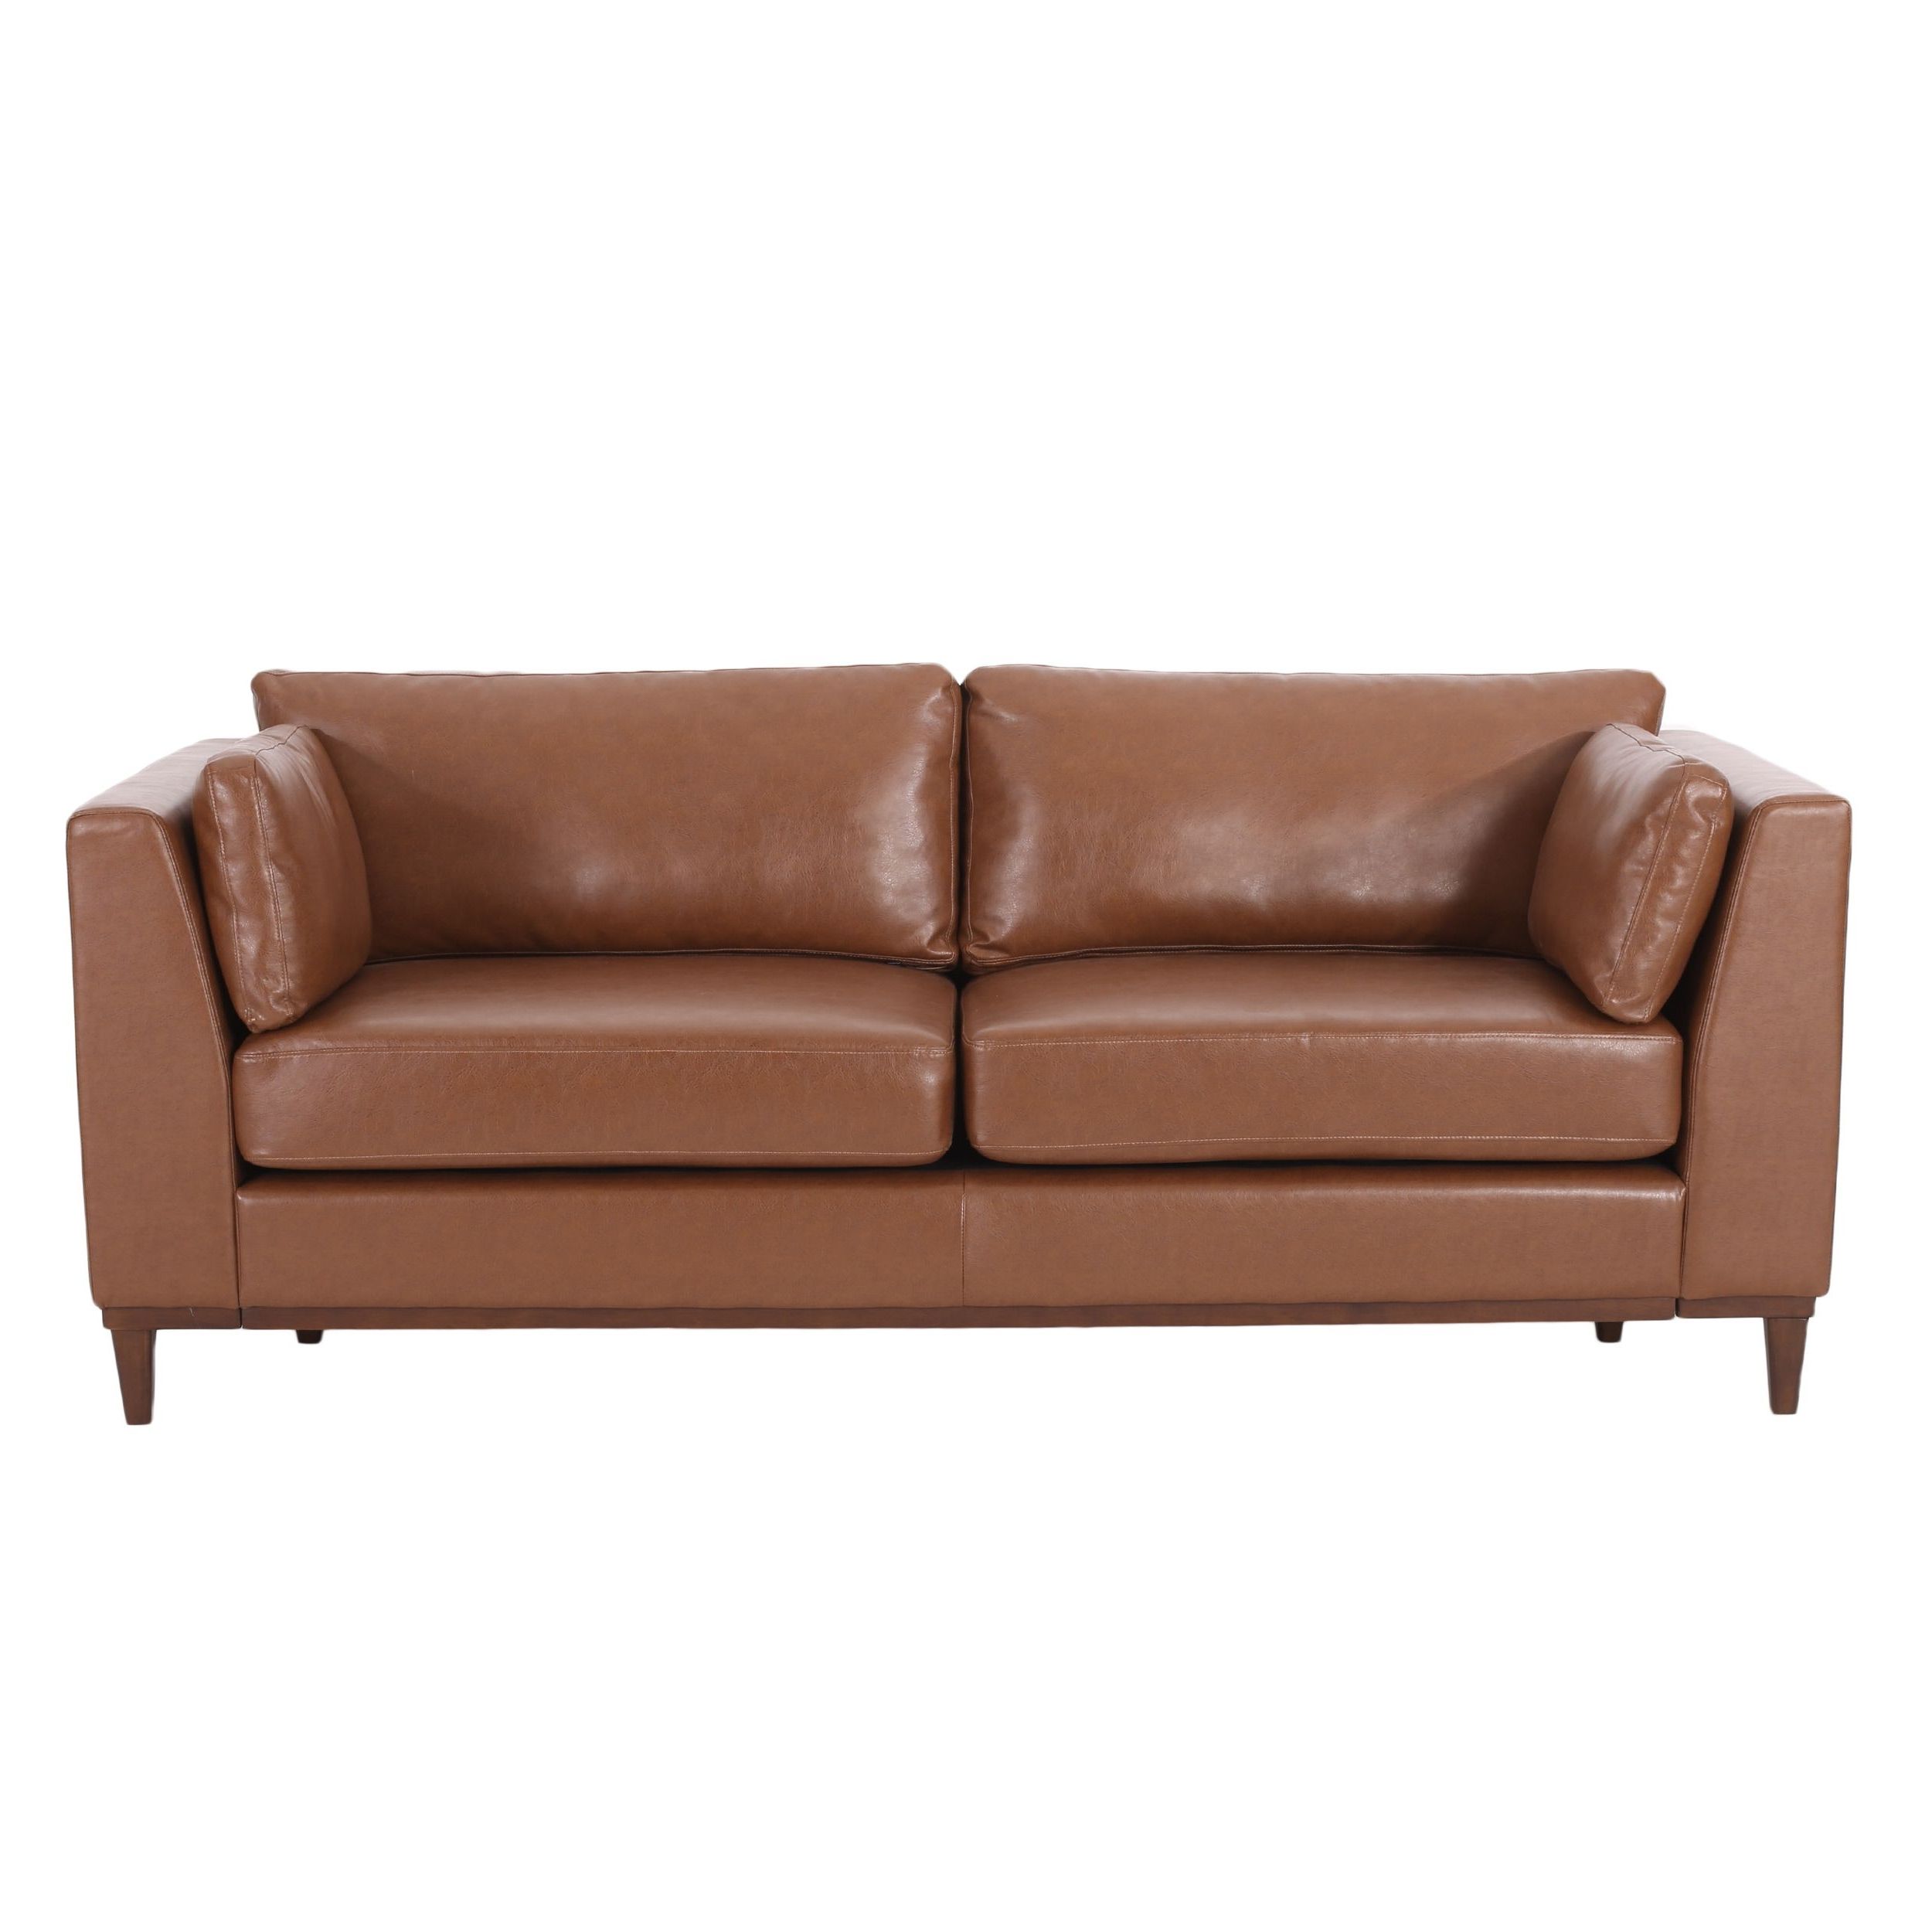 Warbler Faux Leather 3 Seater Sofachristopher Knight Home – On Sale With Regard To Most Recently Released Traditional 3 Seater Faux Leather Sofas (View 14 of 15)